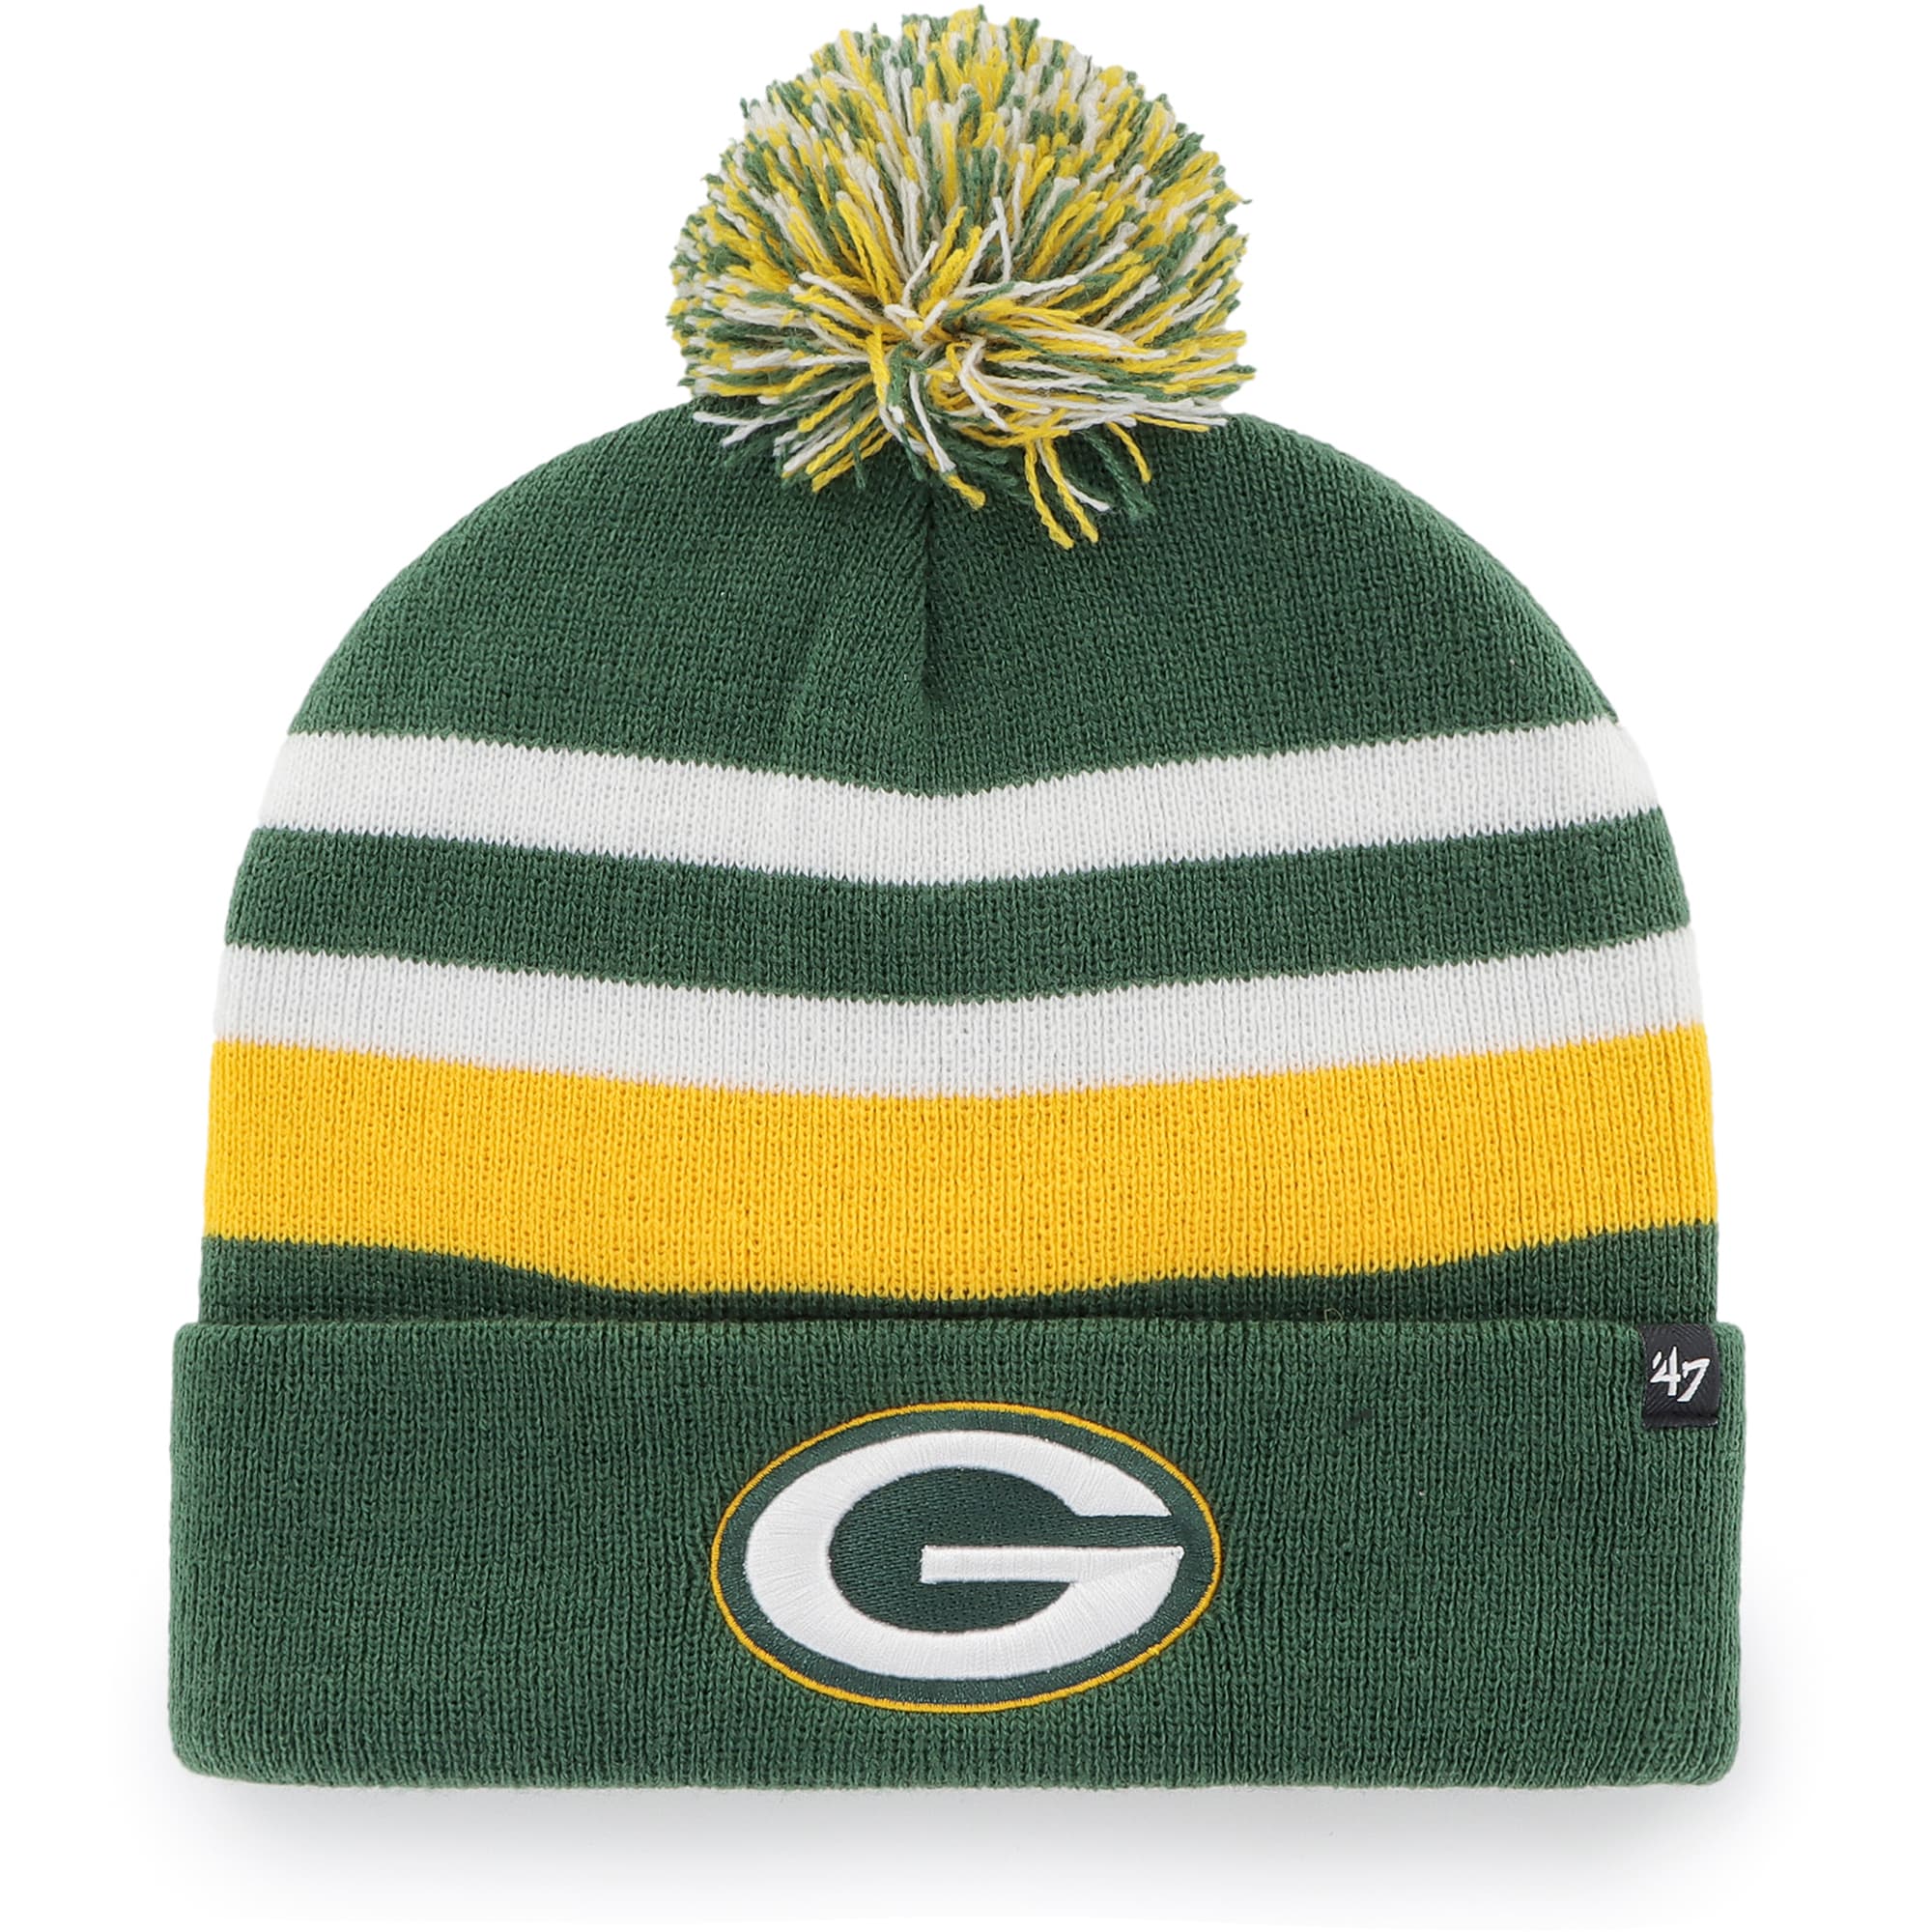 Men's '47 Green Green Bay Packers State Line Cuffed Knit Hat with Pom - OSFA - image 1 of 1